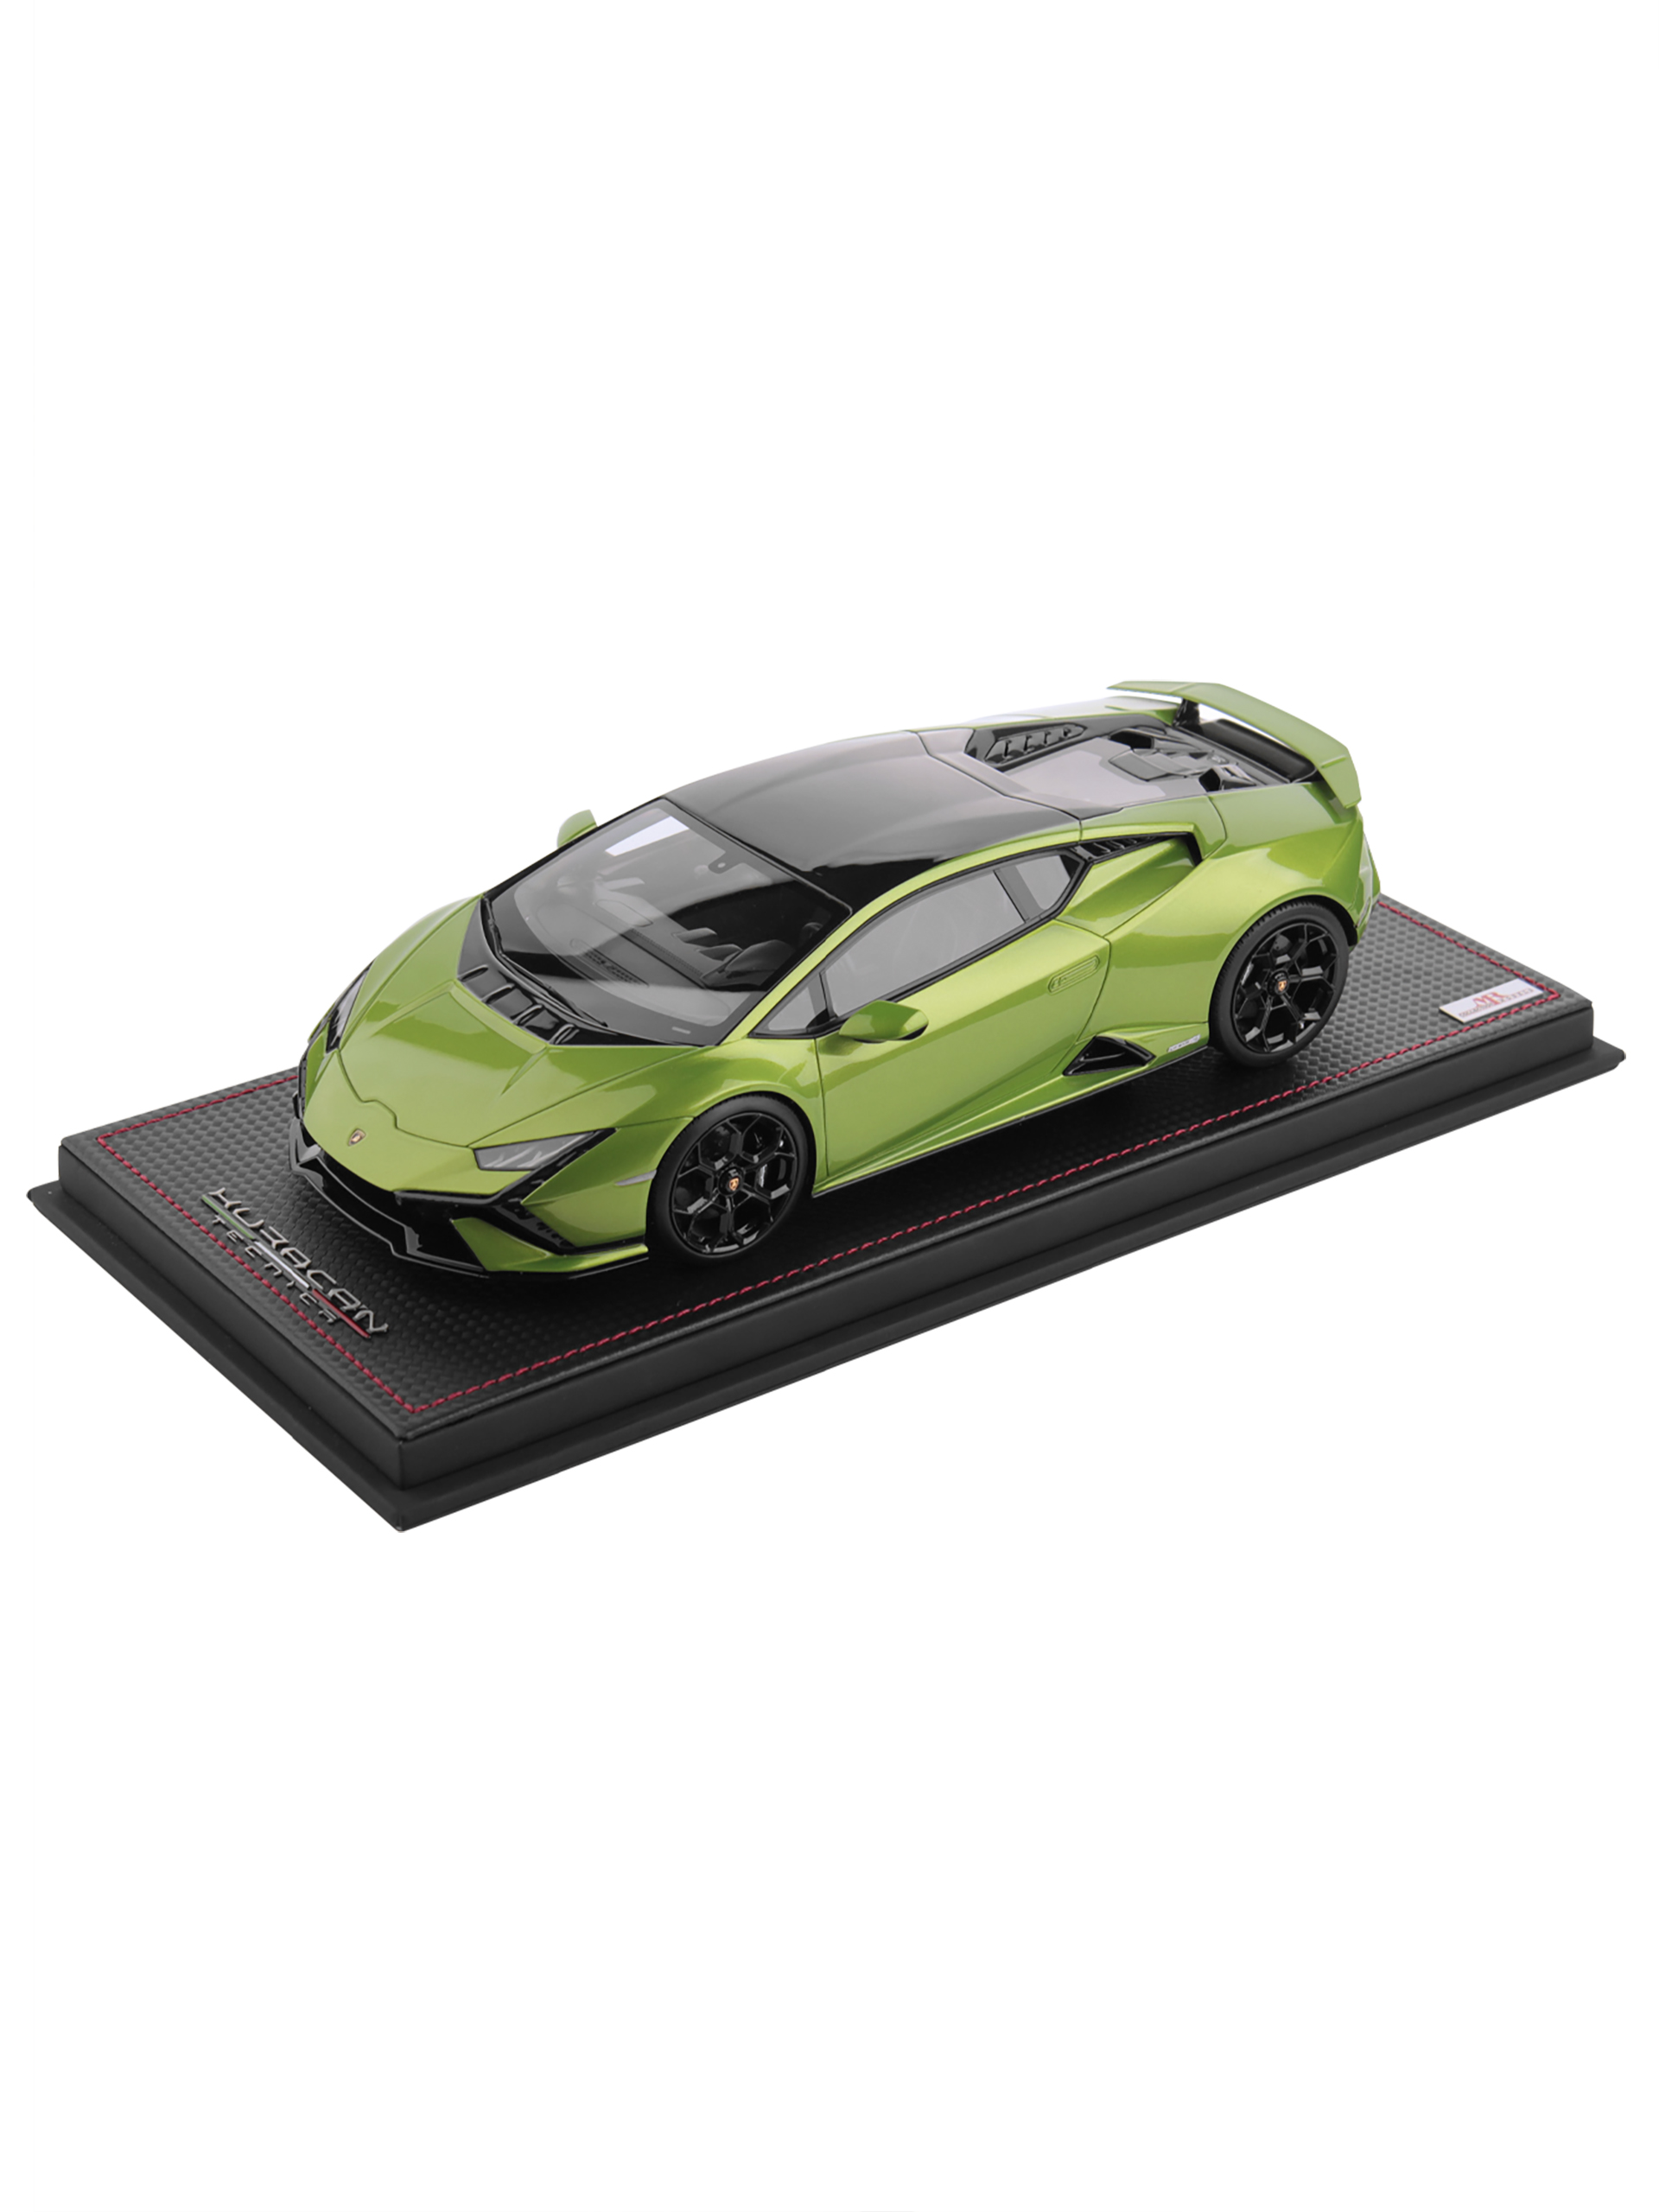 LAMBORGHINI HURACÁN TECNICA MODEL CAR ON A SCALE OF 1:18 BY MR COLLECTION